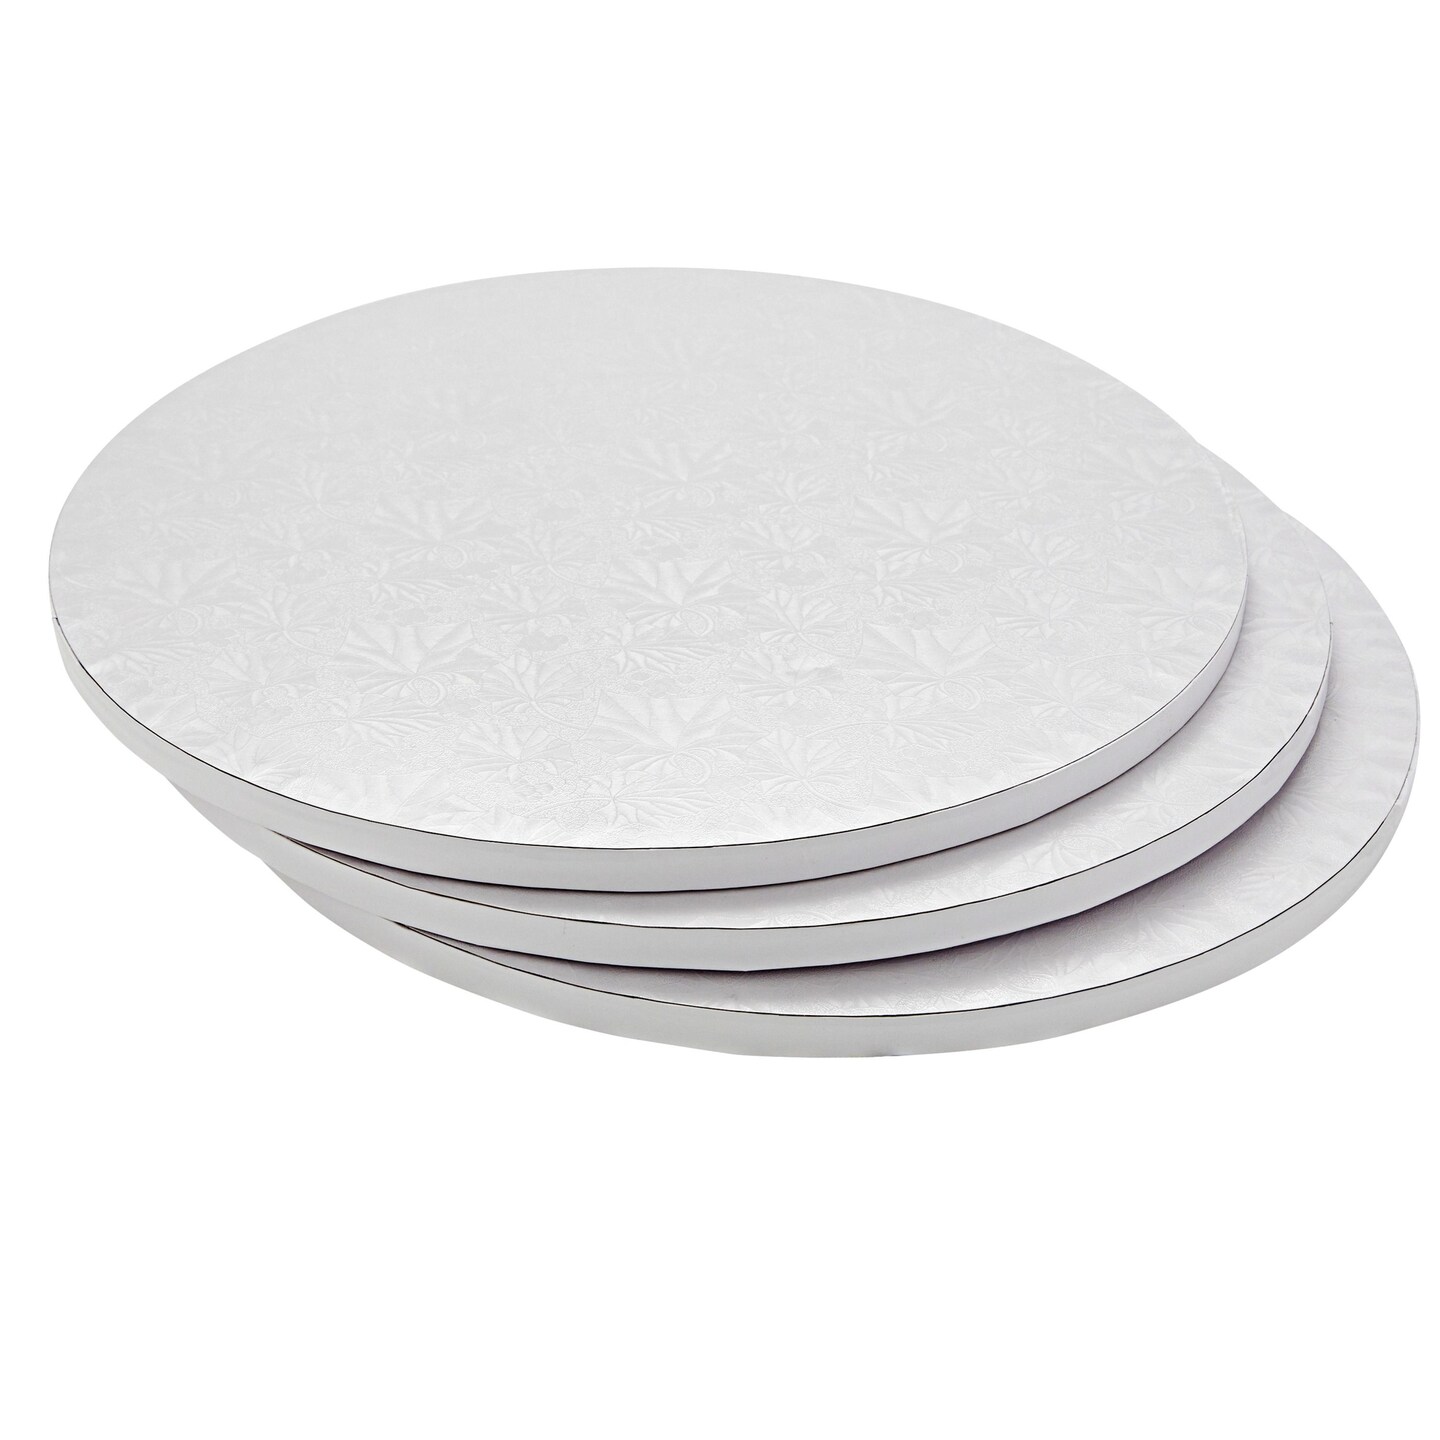 Amazon.com | Spec101 Round Cake Boards Bulk 12pk - 10 Inch Cake Drum Round  Silver Cardboard Base with 1/2 Inch Thick Smooth Foil Edge: Cake Stands